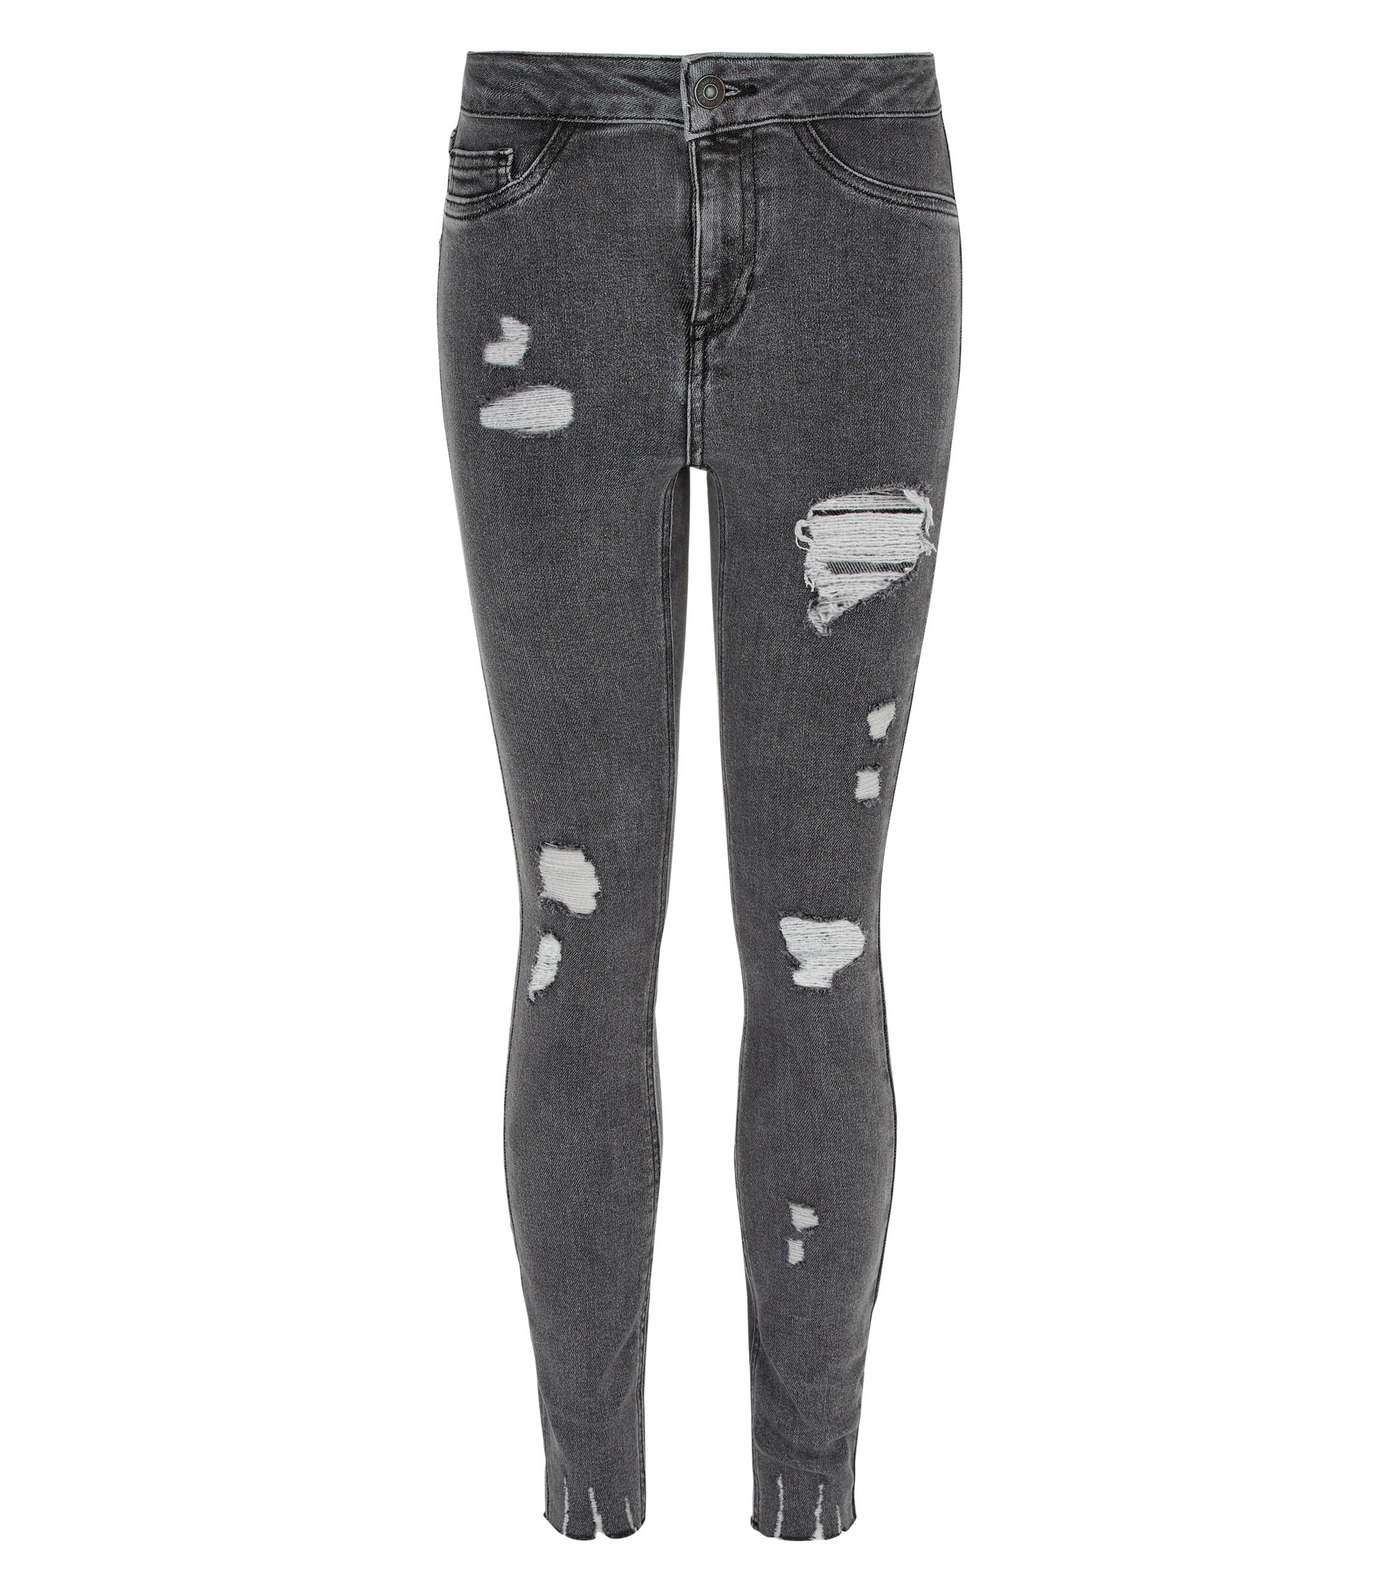 Girls Grey Ripped High Waist Super Skinny Jeans Image 4